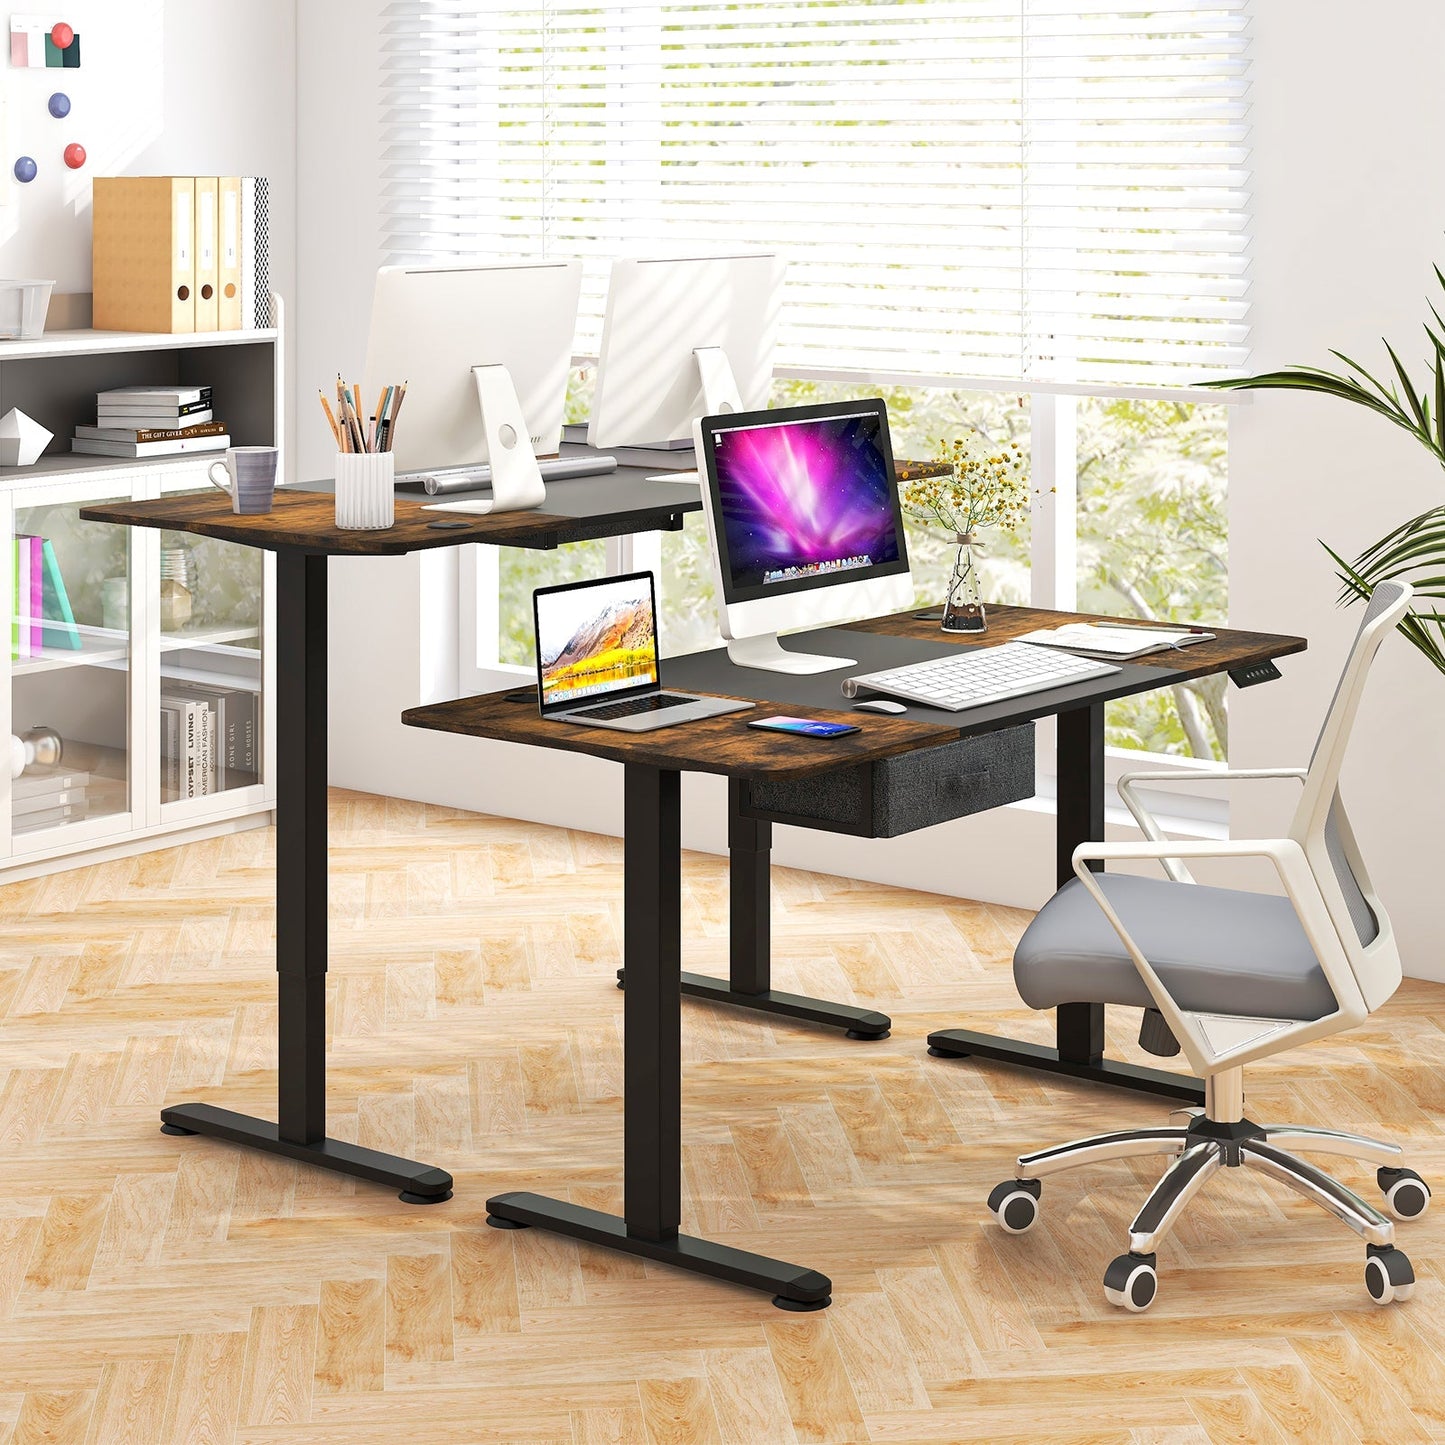 Electric Height Adjustable Standing Desk with USB Charging Port-Black